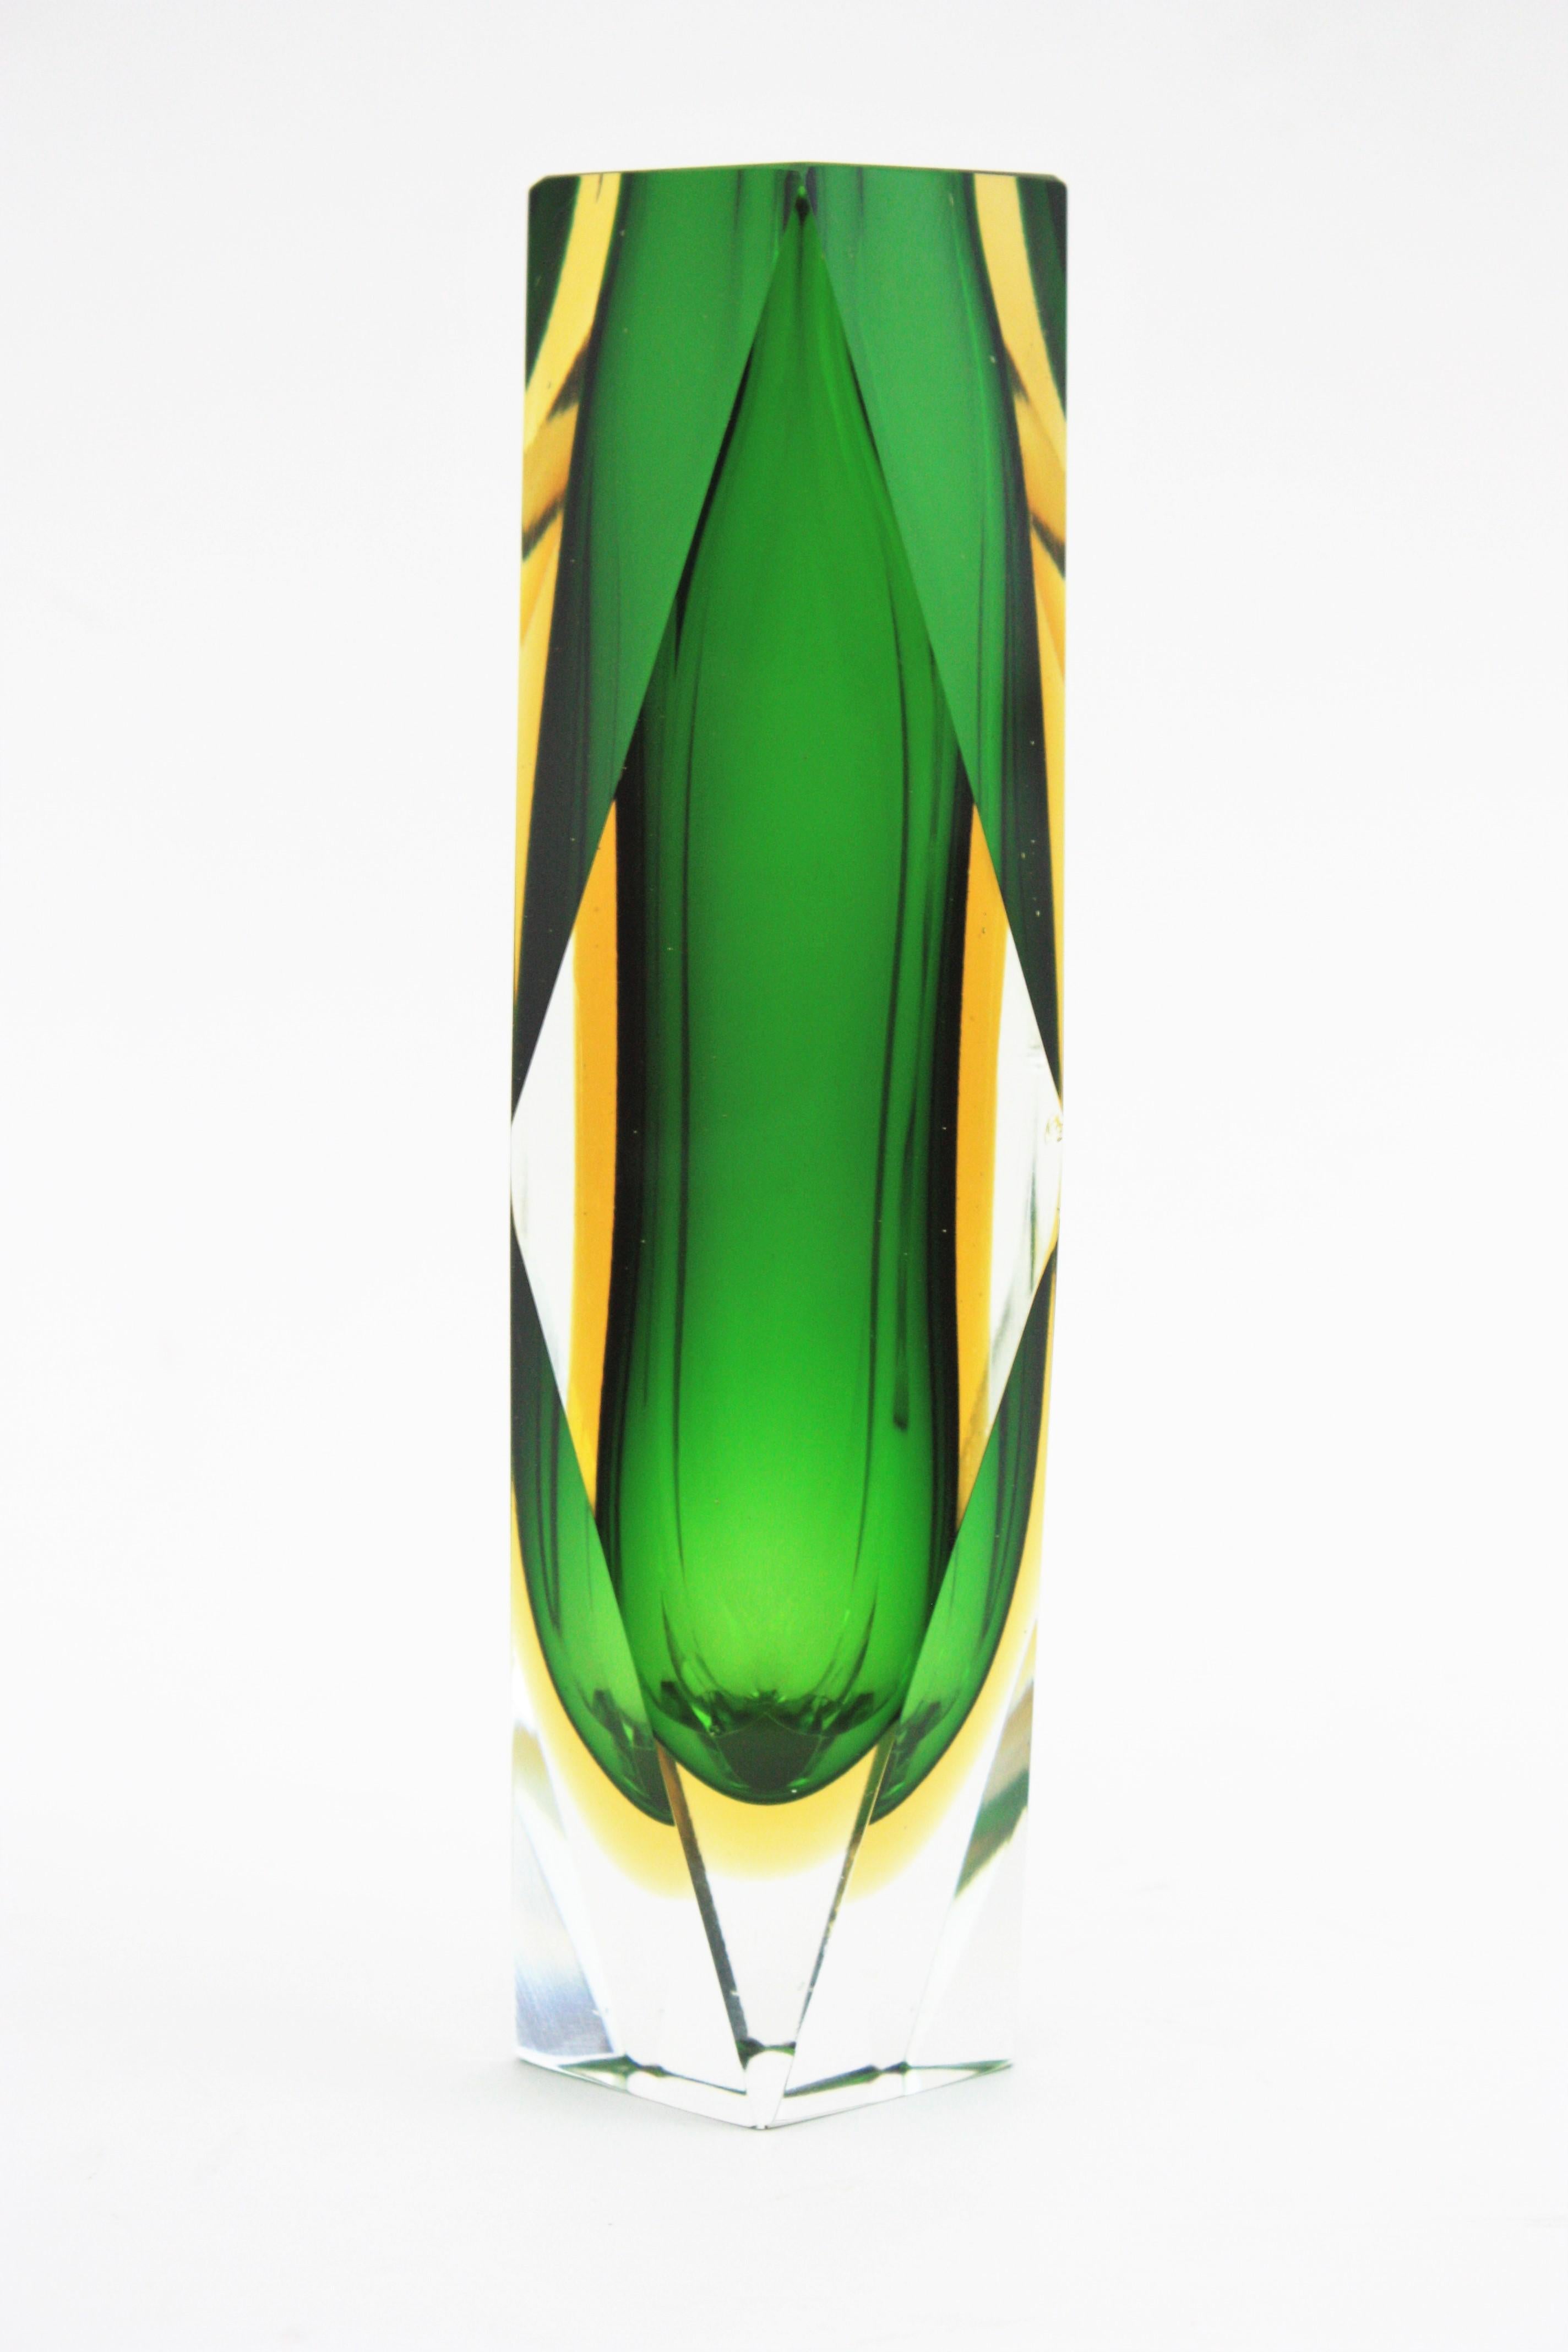 20th Century Giant Mandruzzato Murano Sommerso Green Yellow Faceted Art Glass Vase For Sale